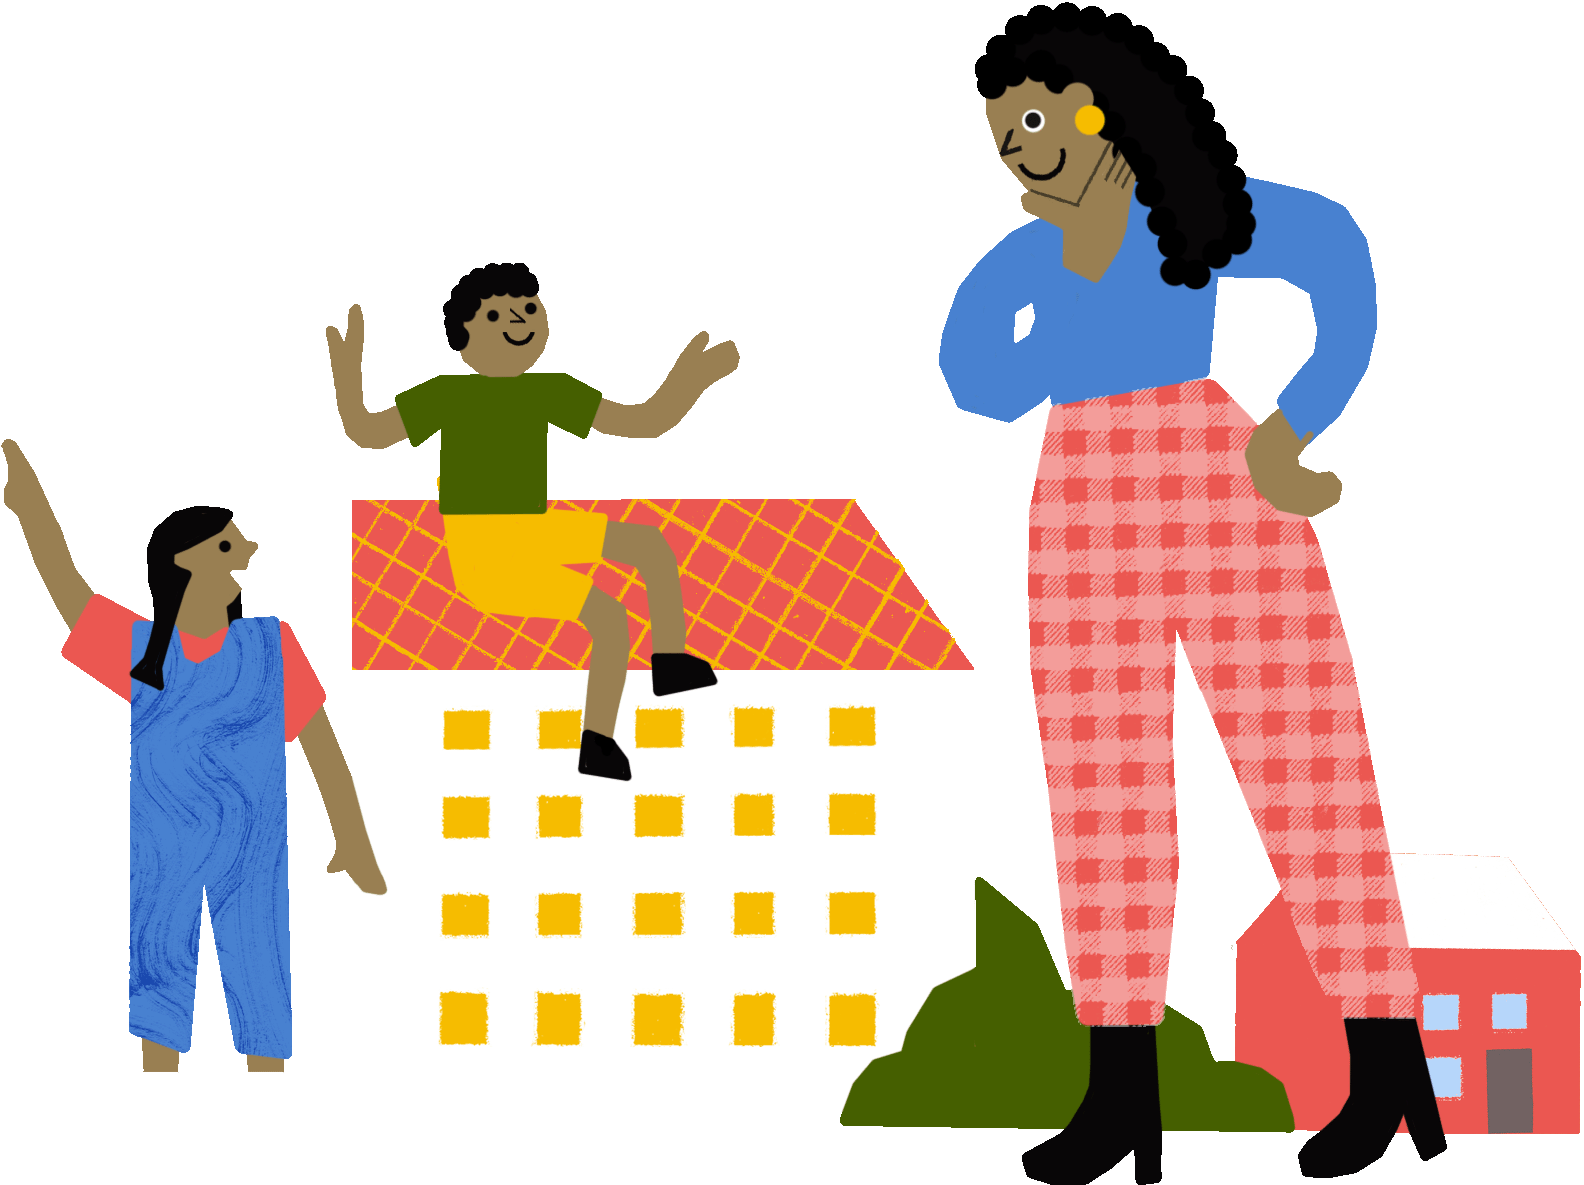 Illustration of a woman standing next to two buildings, with a child sat on top of one building and another child stood next to it